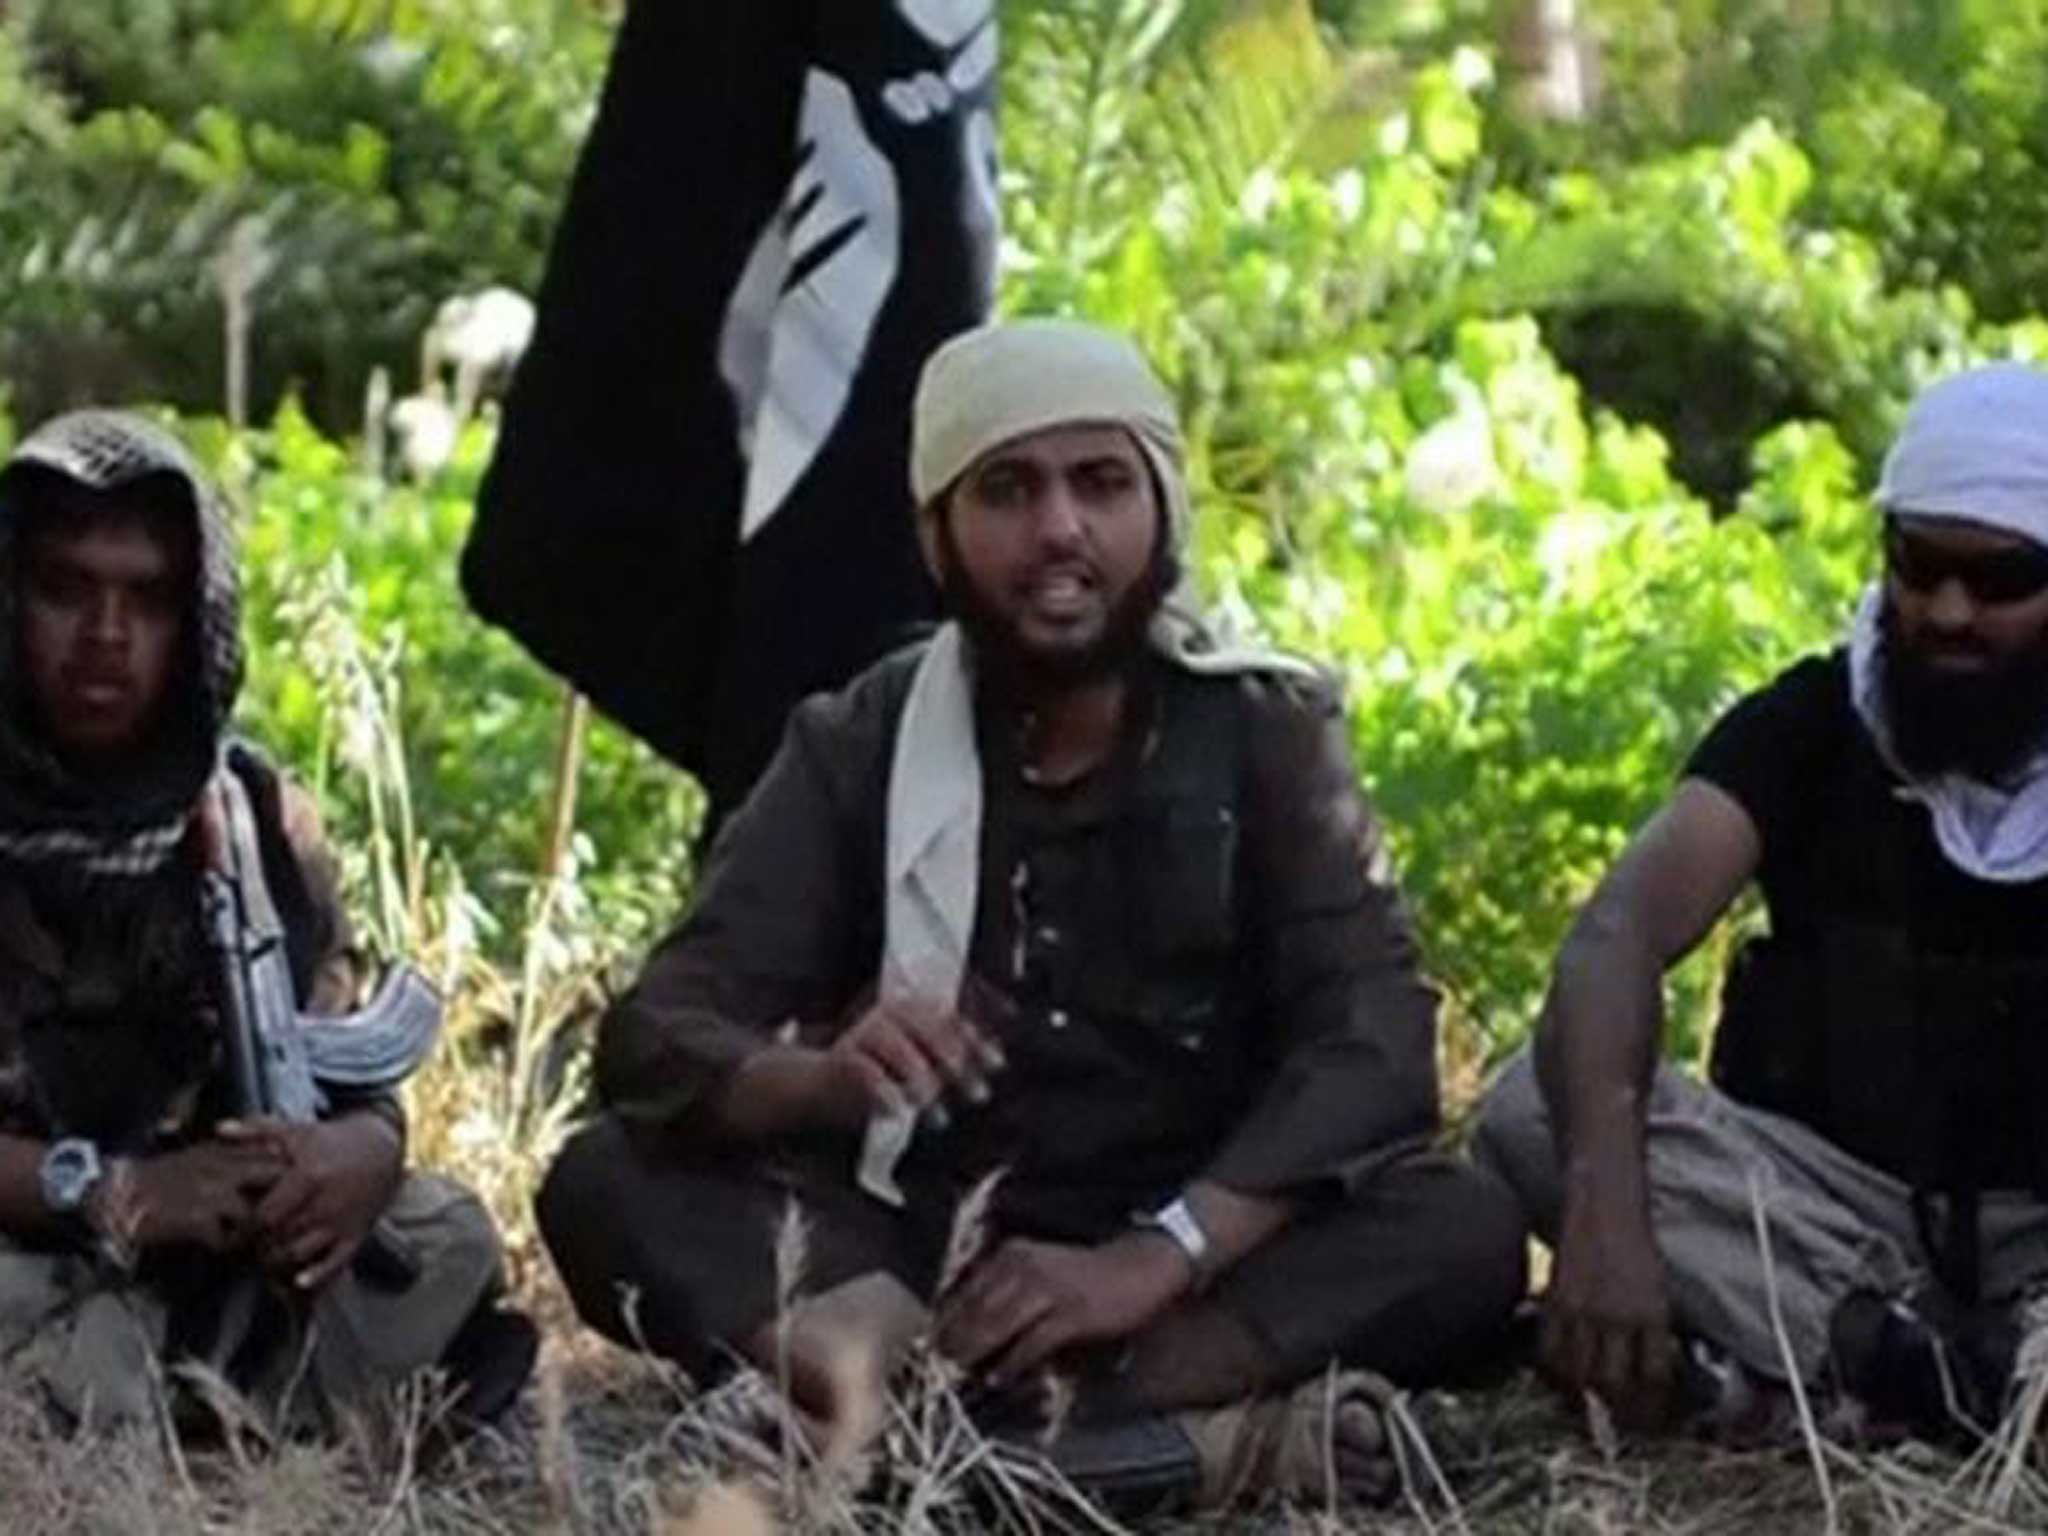 Joining forces: these young British men featured in an Isis video in which they urged Islamists in the West to join them in Iraq and Syria